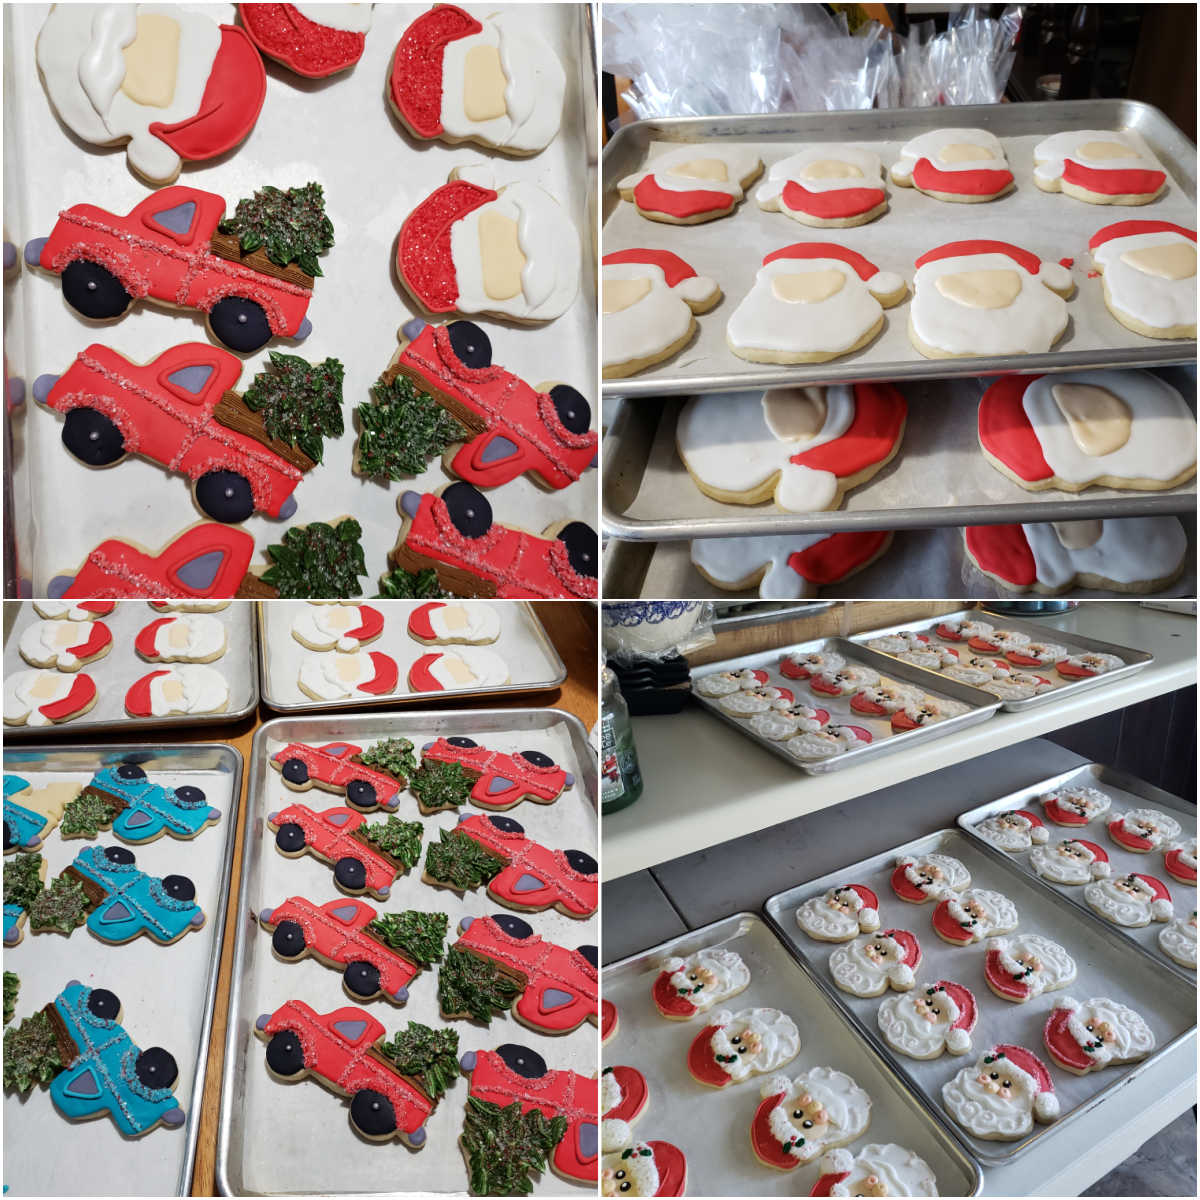 Collage of images of Christmas sugar cookies drying on sheet pans in kitchen.